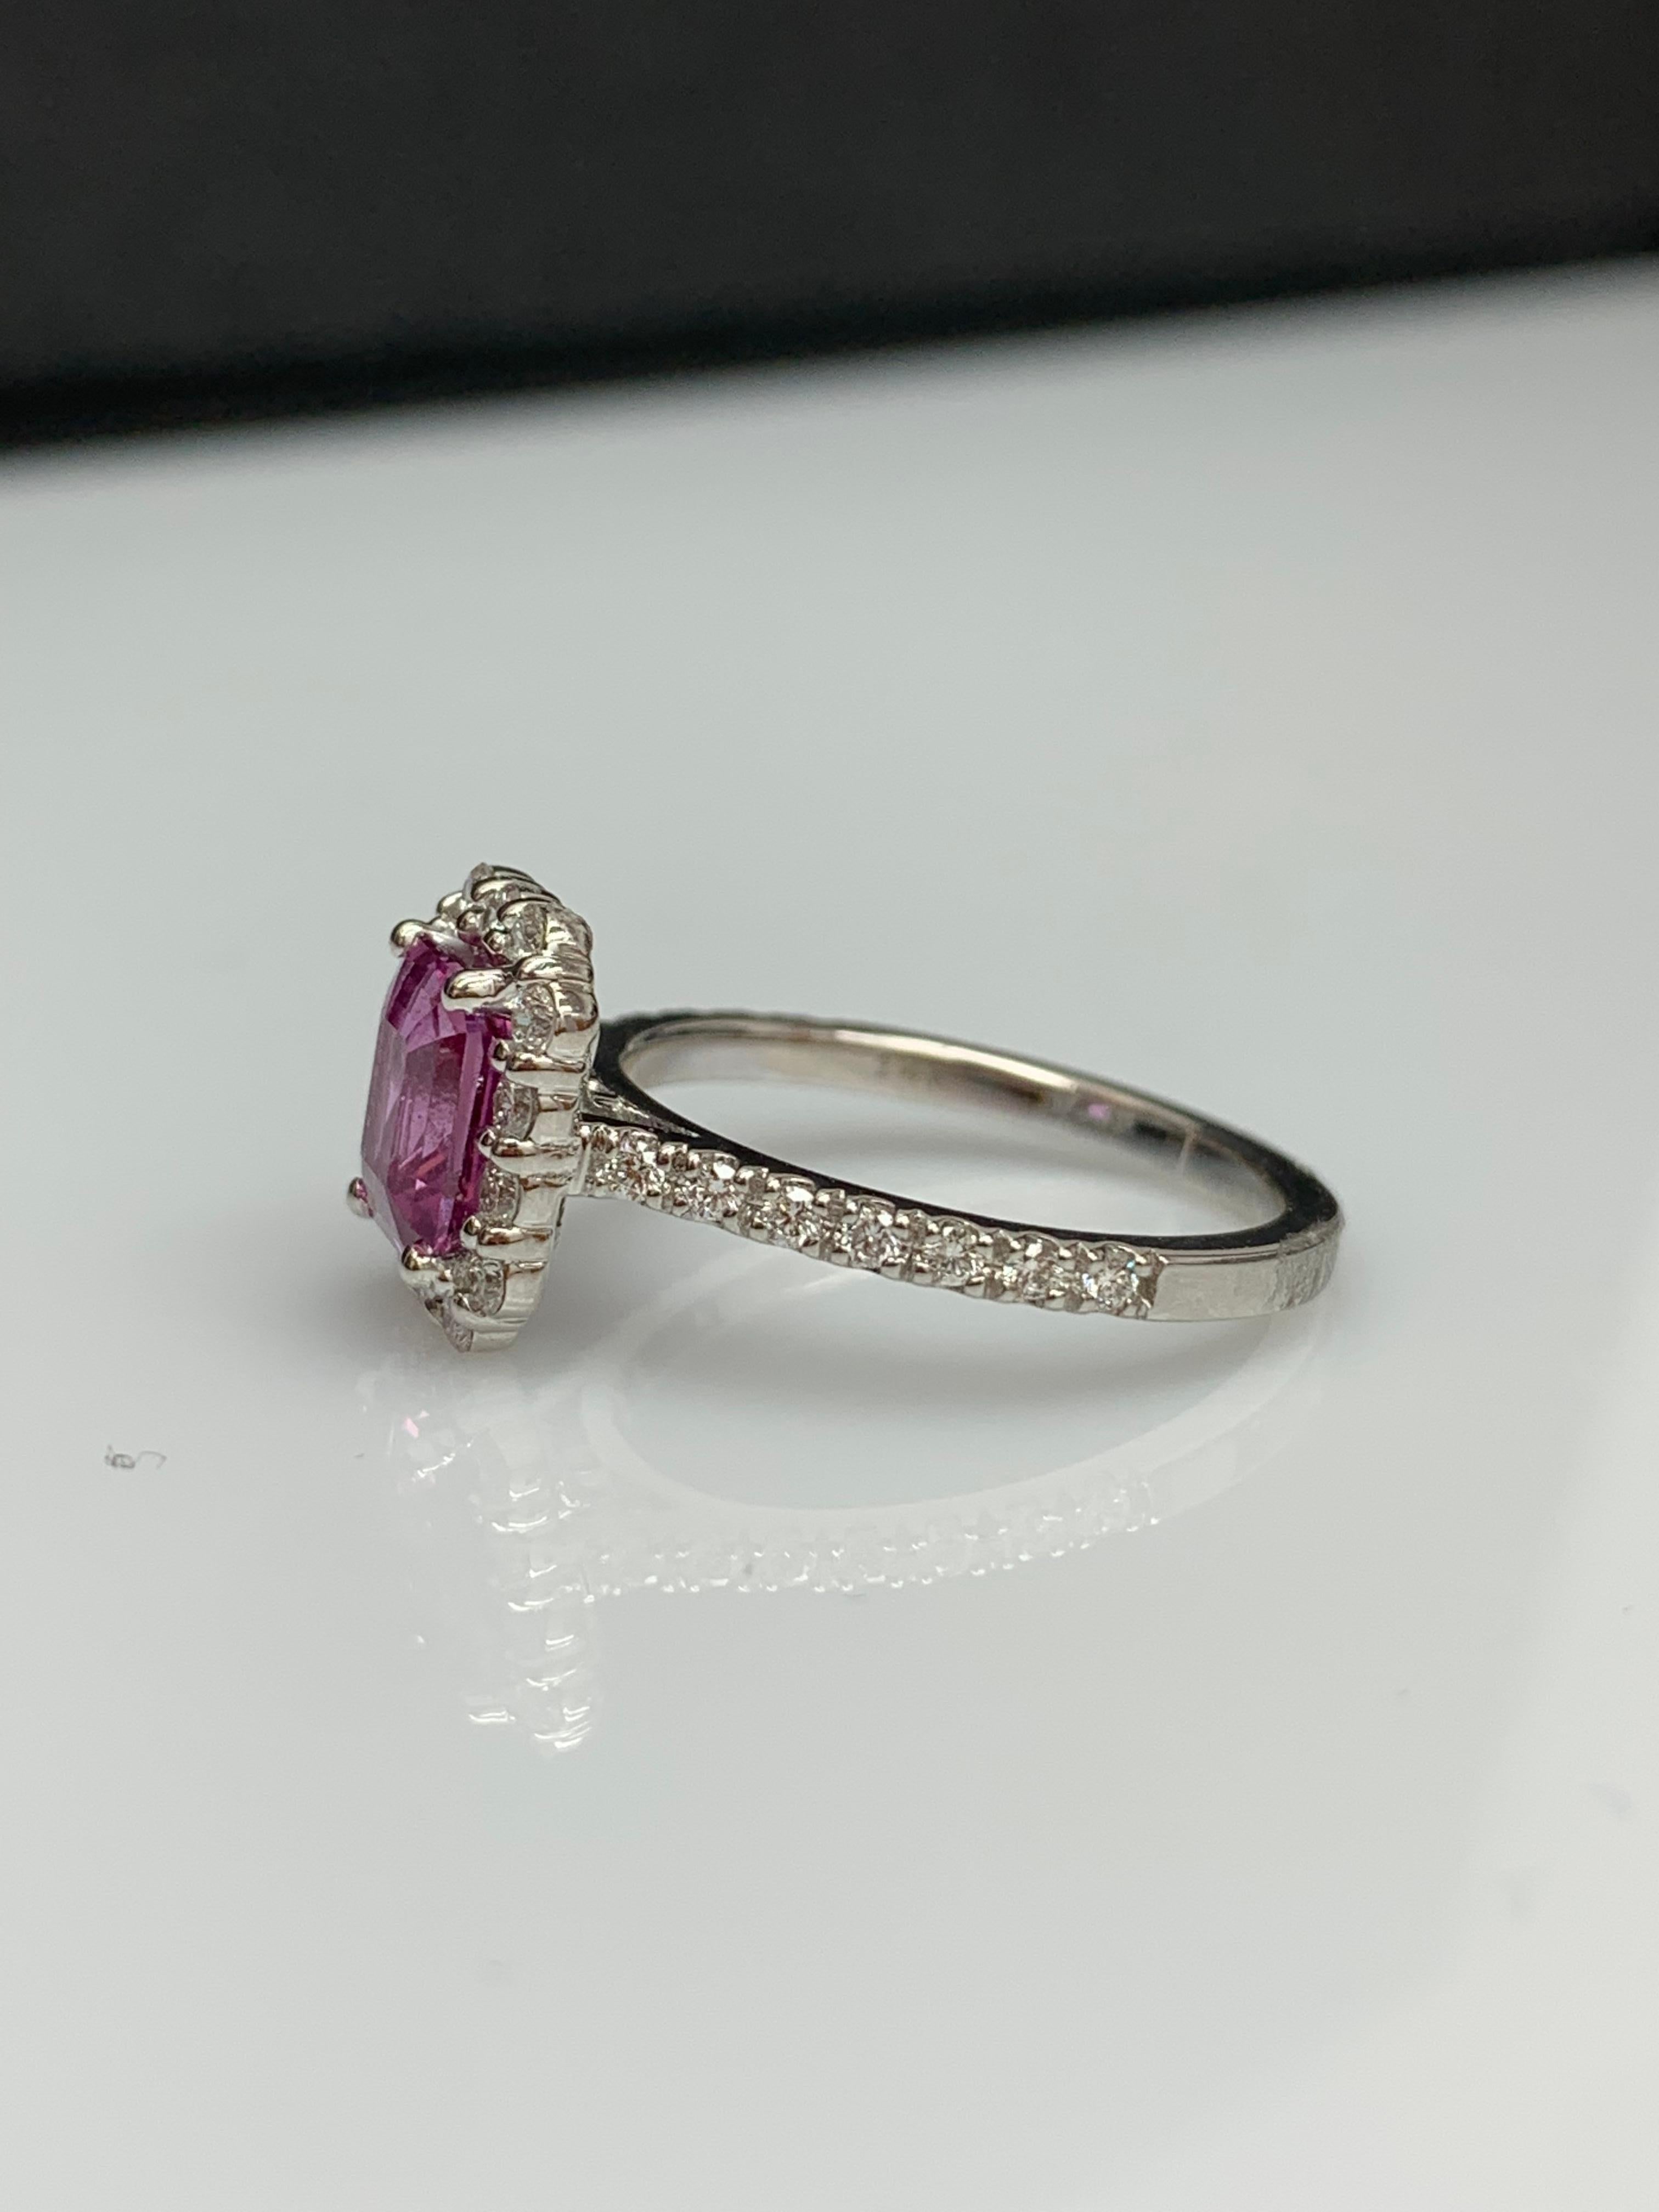 1.59 Carat Emerald Cut Pink Sapphire Diamond Engagement Ring in 14K White Gold For Sale 5